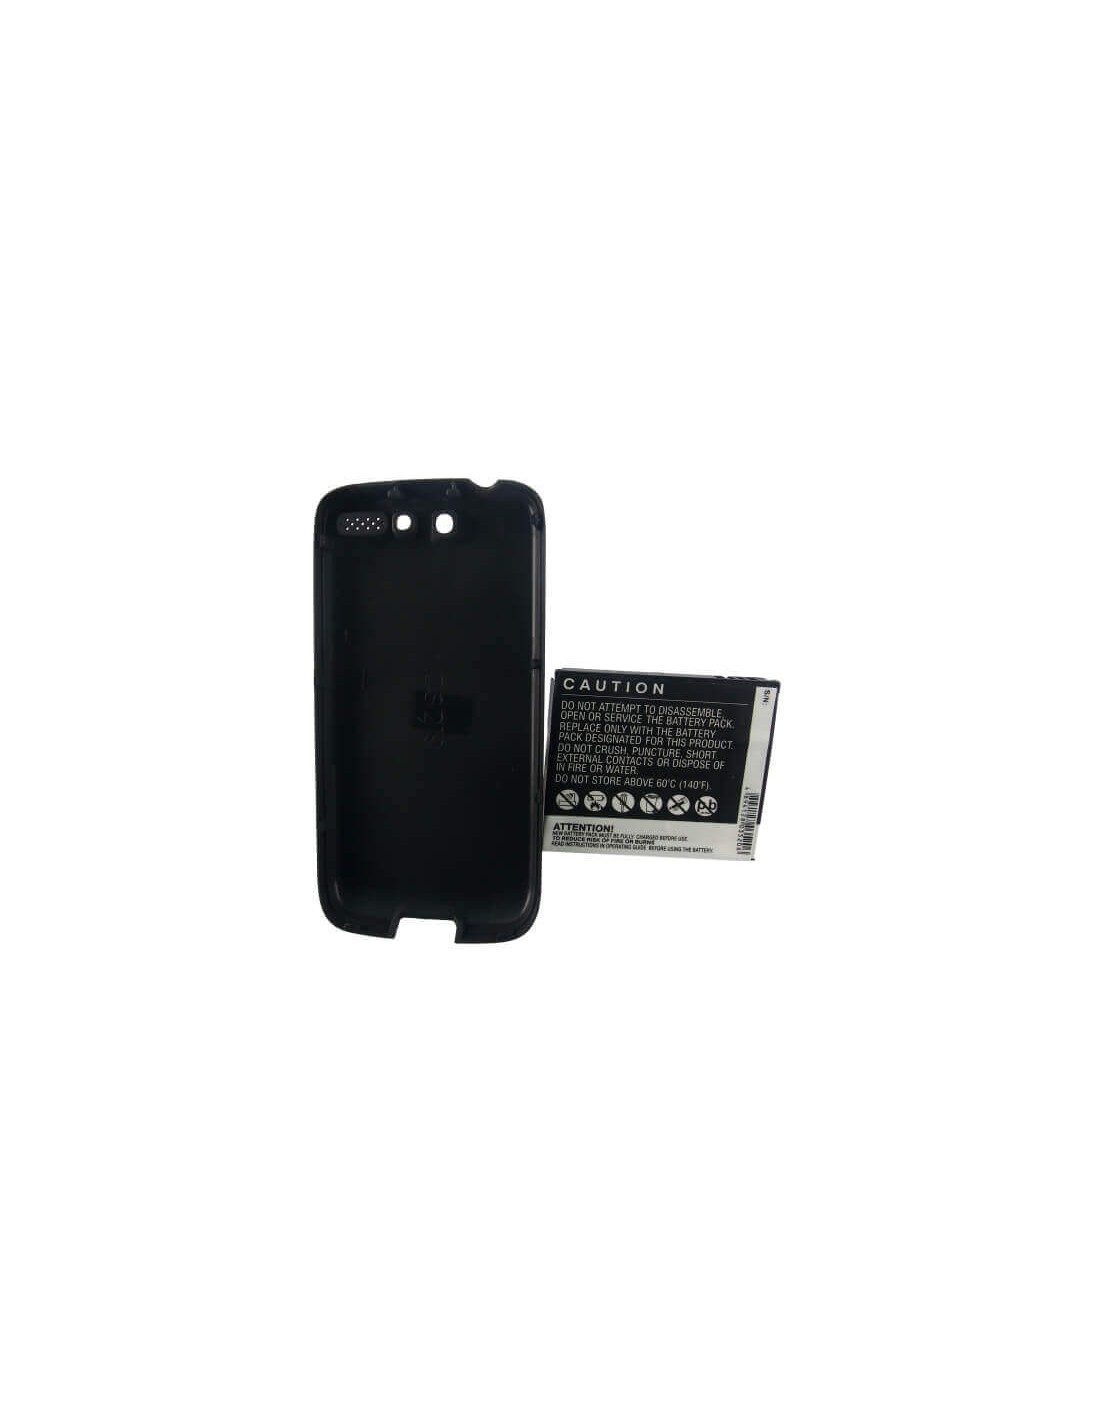 Battery for Google G7 extended with black back cover 3.7V, 2400mAh - 8.88Wh